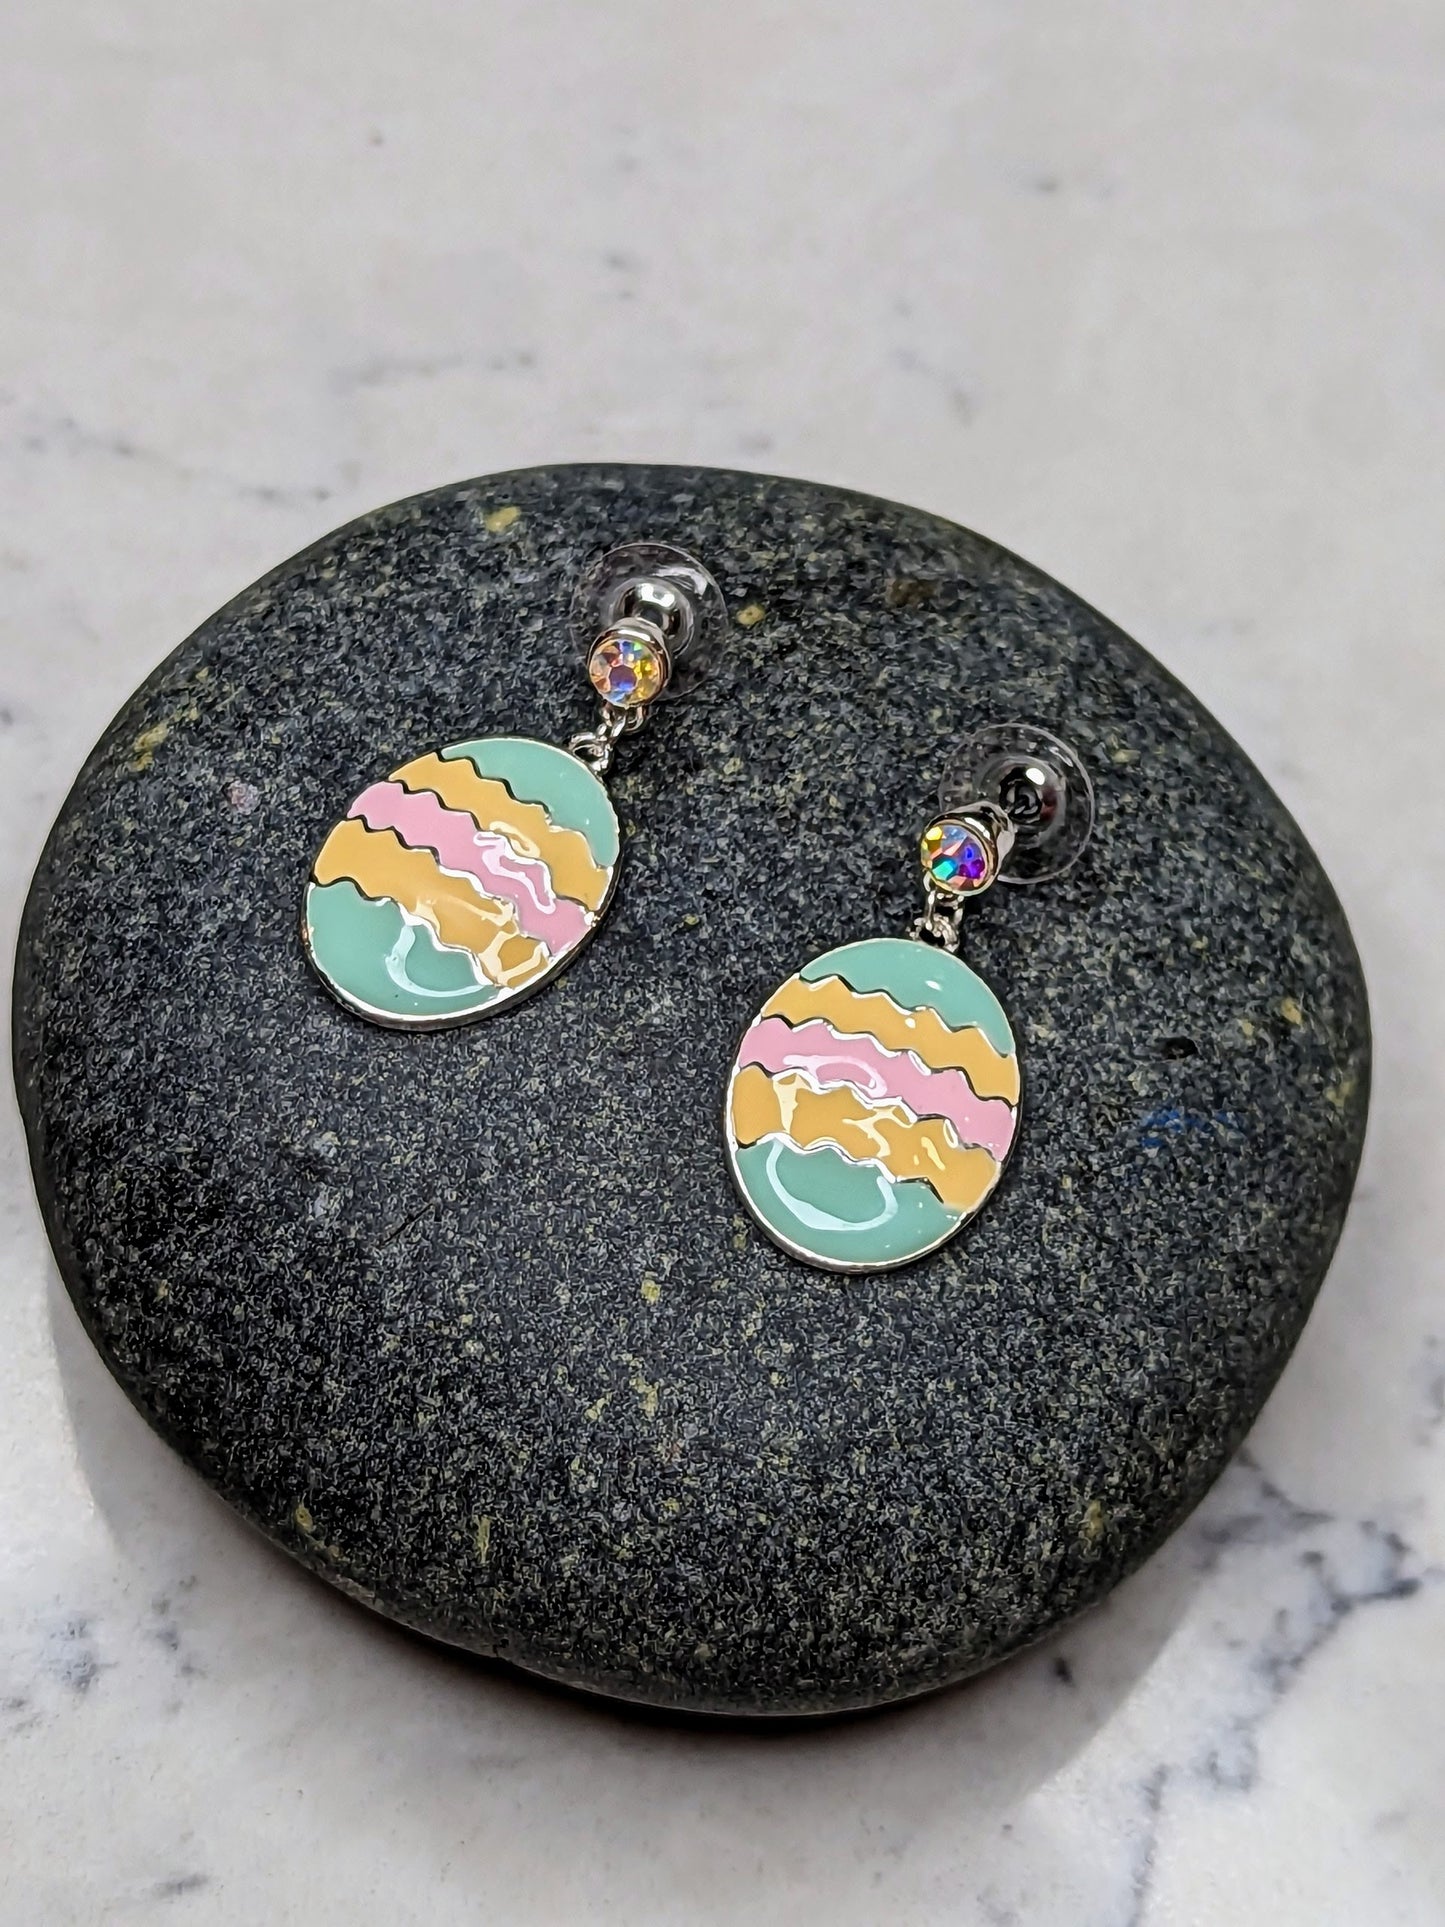 Easter Egg Pastel Stripe Chevron Decorated Egg Drop Earrings with Crystals